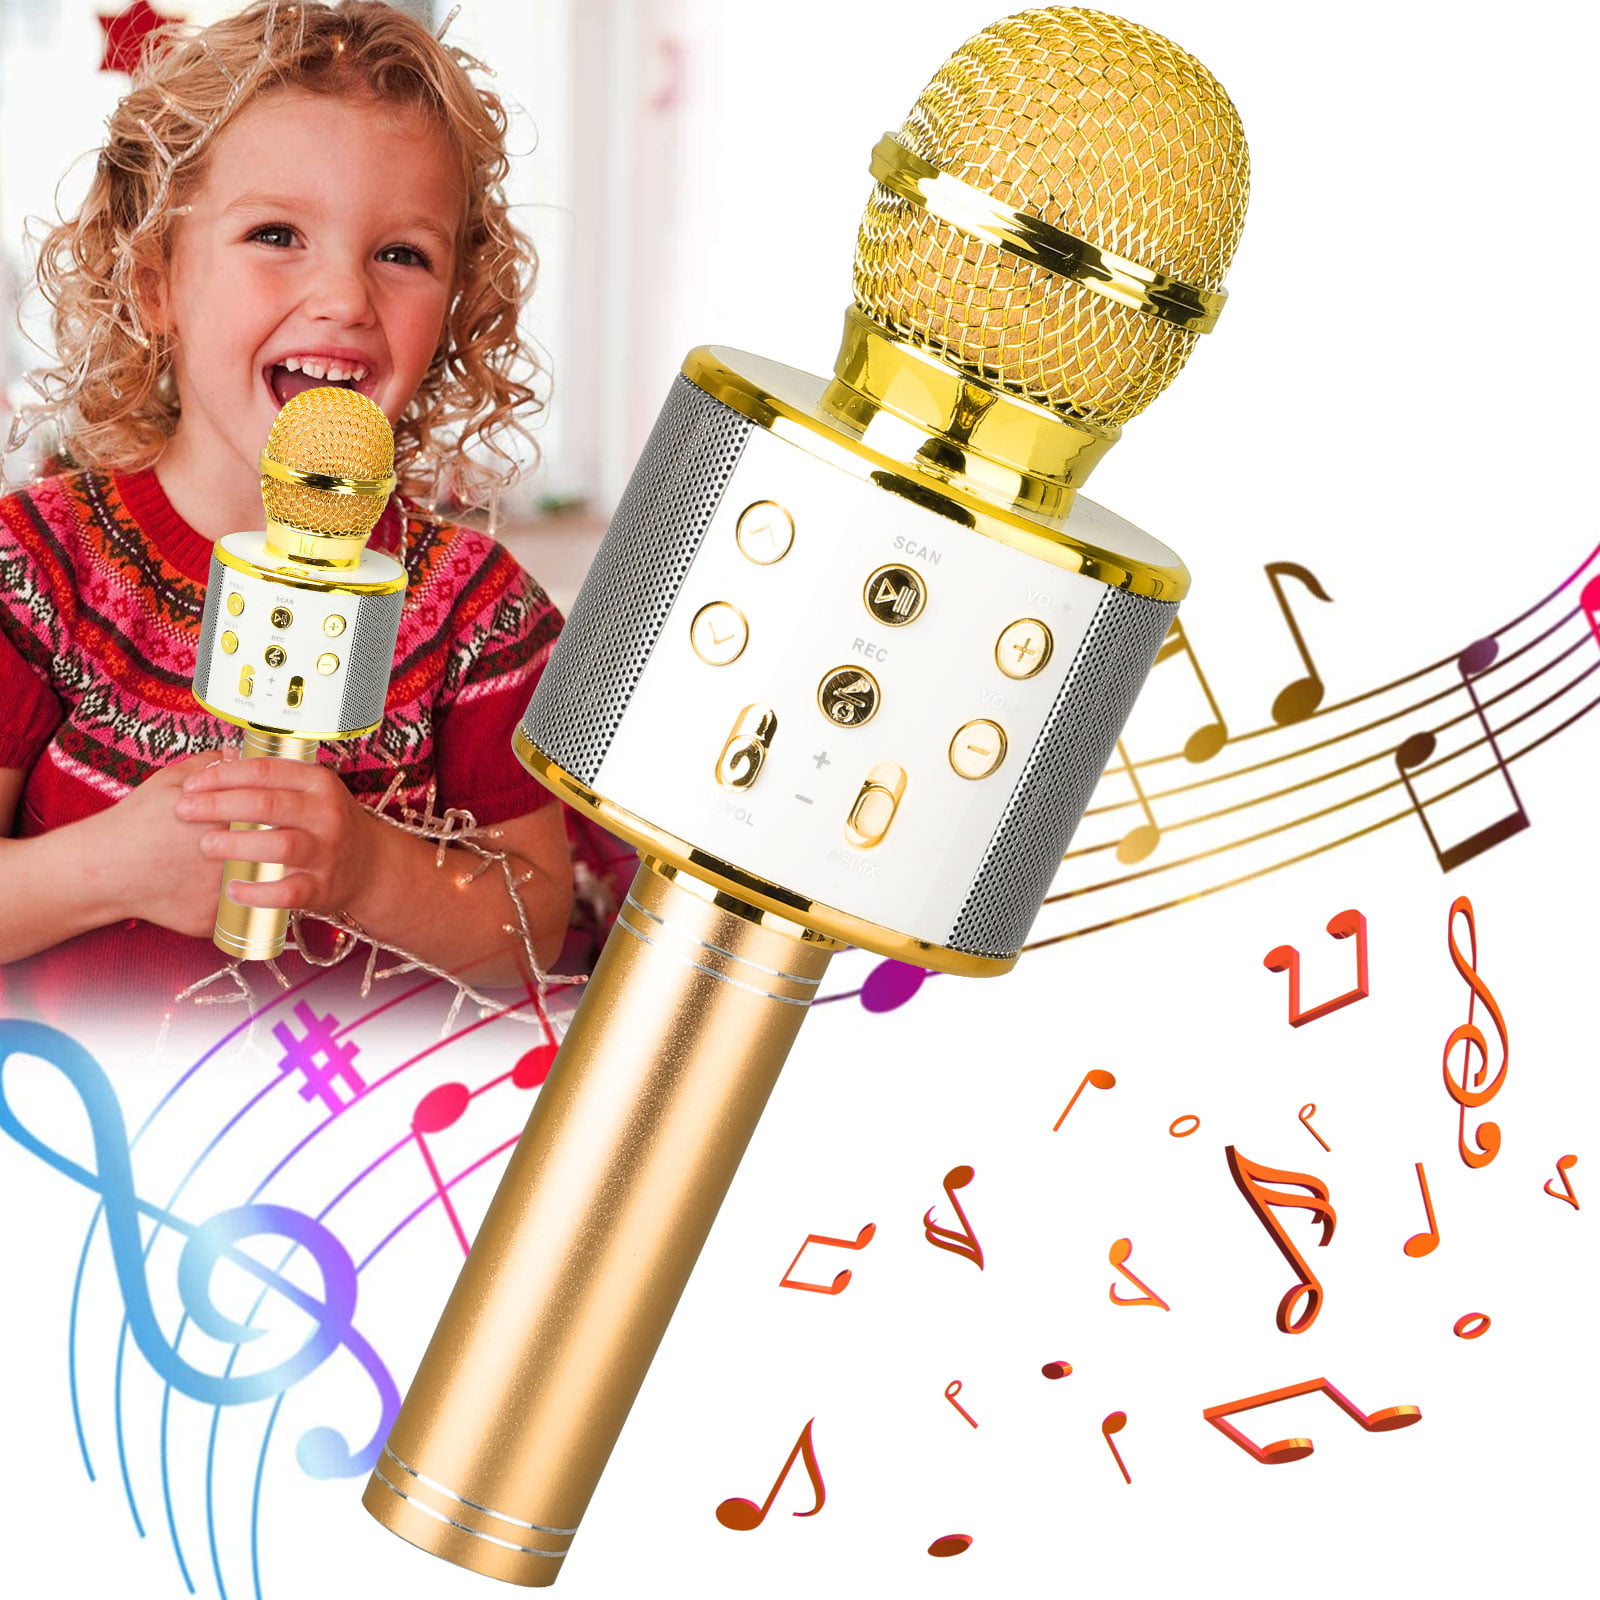 Rose Gold Annstory Wireless Bluetooth Karaoke Microphone,Kid Girl Top Christmas Birthday Gift Toy,2019 Best Gift Presents for Girl Kid Boy Children Age 5 6 7 8 9 10 11 12 Years Old 